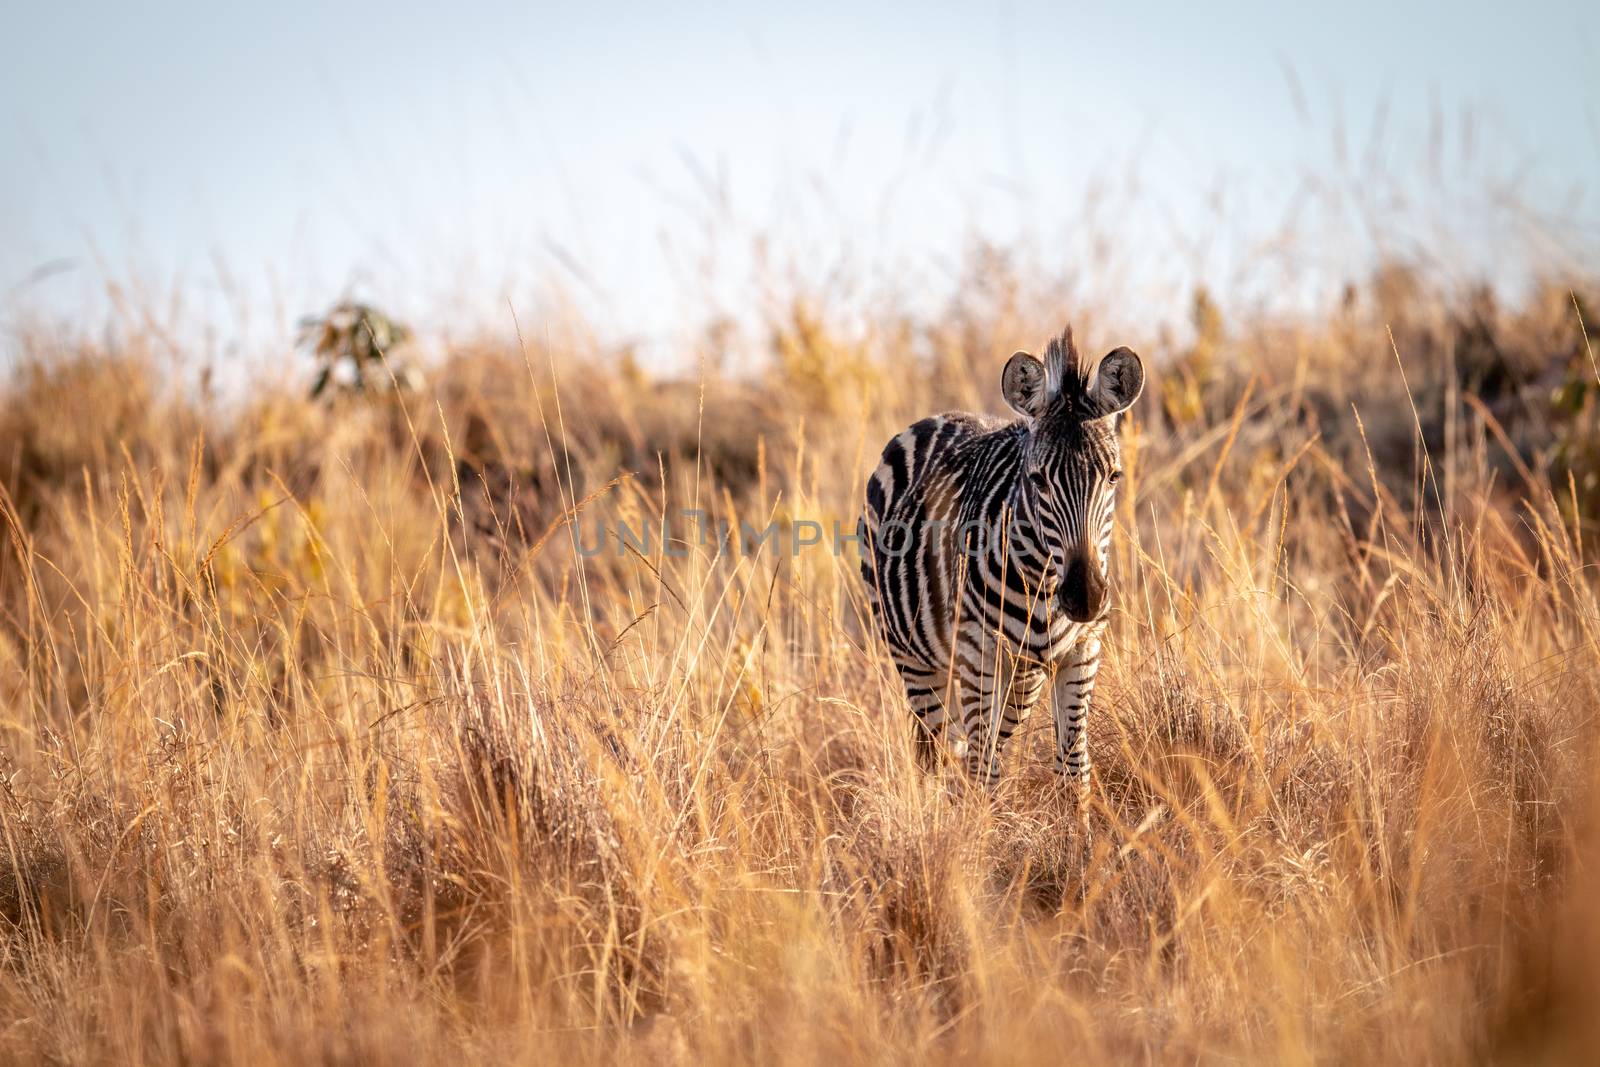 Young Zebra standing in the high grass in the Welgevonden game reserve, South Africa.